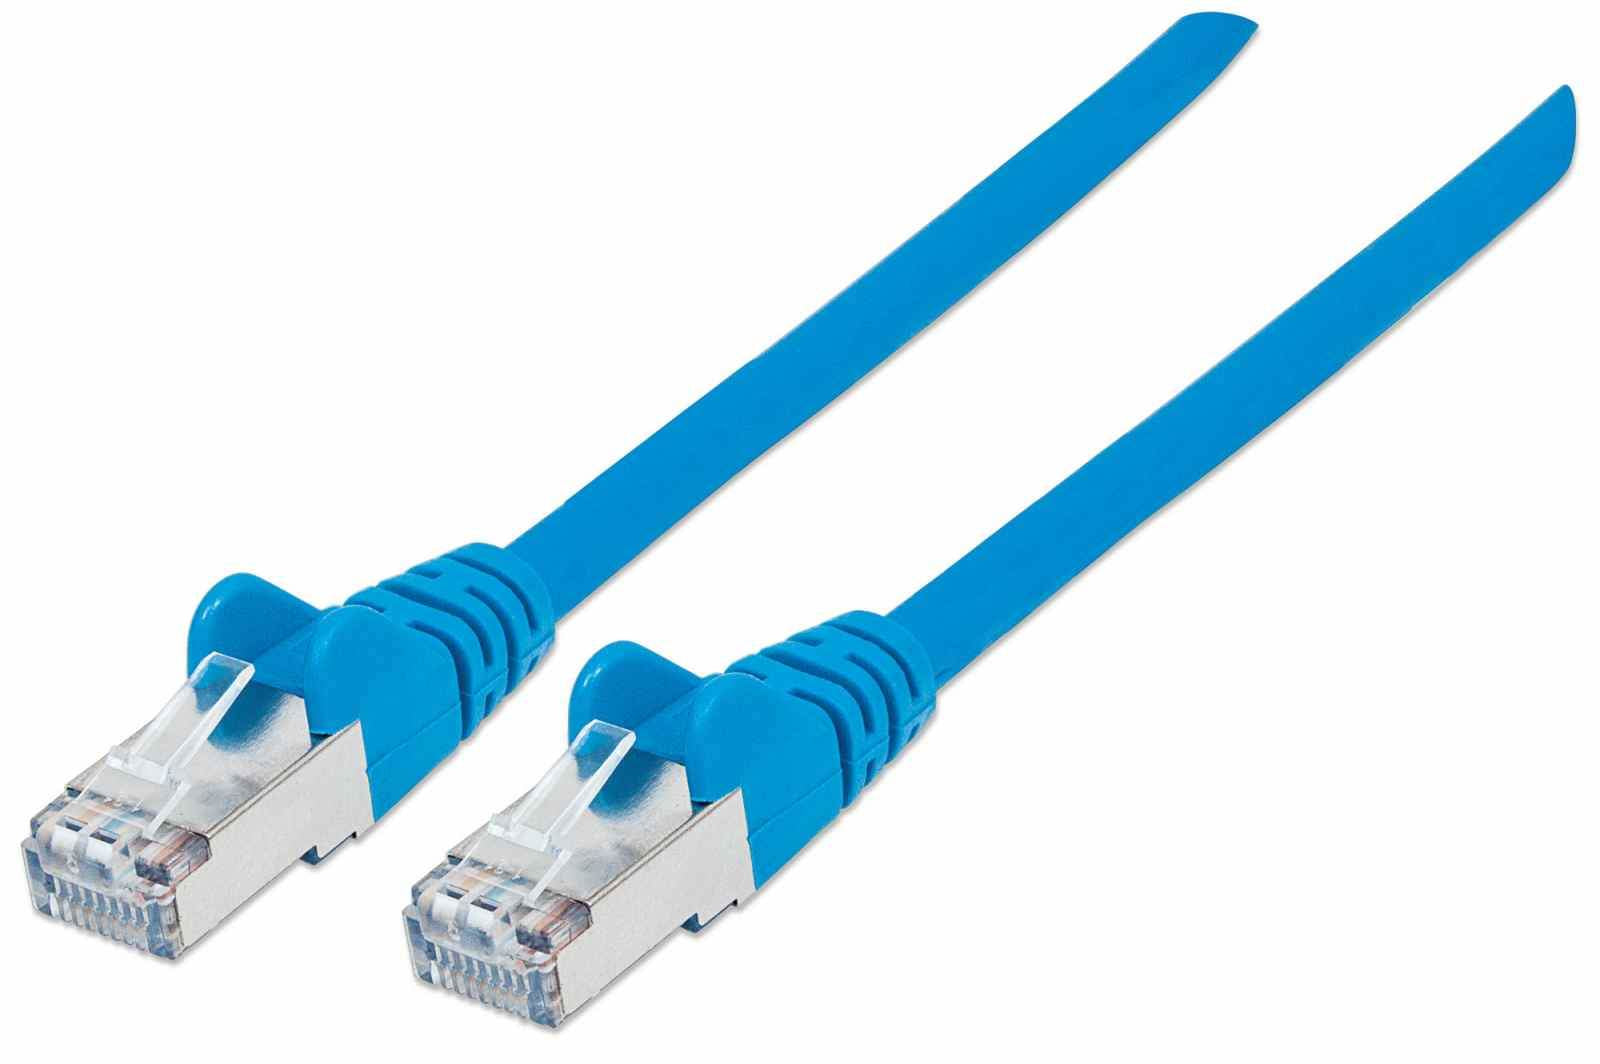 Intellinet Network Patch Cable, Cat7 Cable/Cat6A Plugs, 5m, Blue, Copper, S/FTP, LSOH / LSZH, PVC, RJ45, Gold Plated Contacts, Snagless, Booted, Lifetime Warranty, Polybag